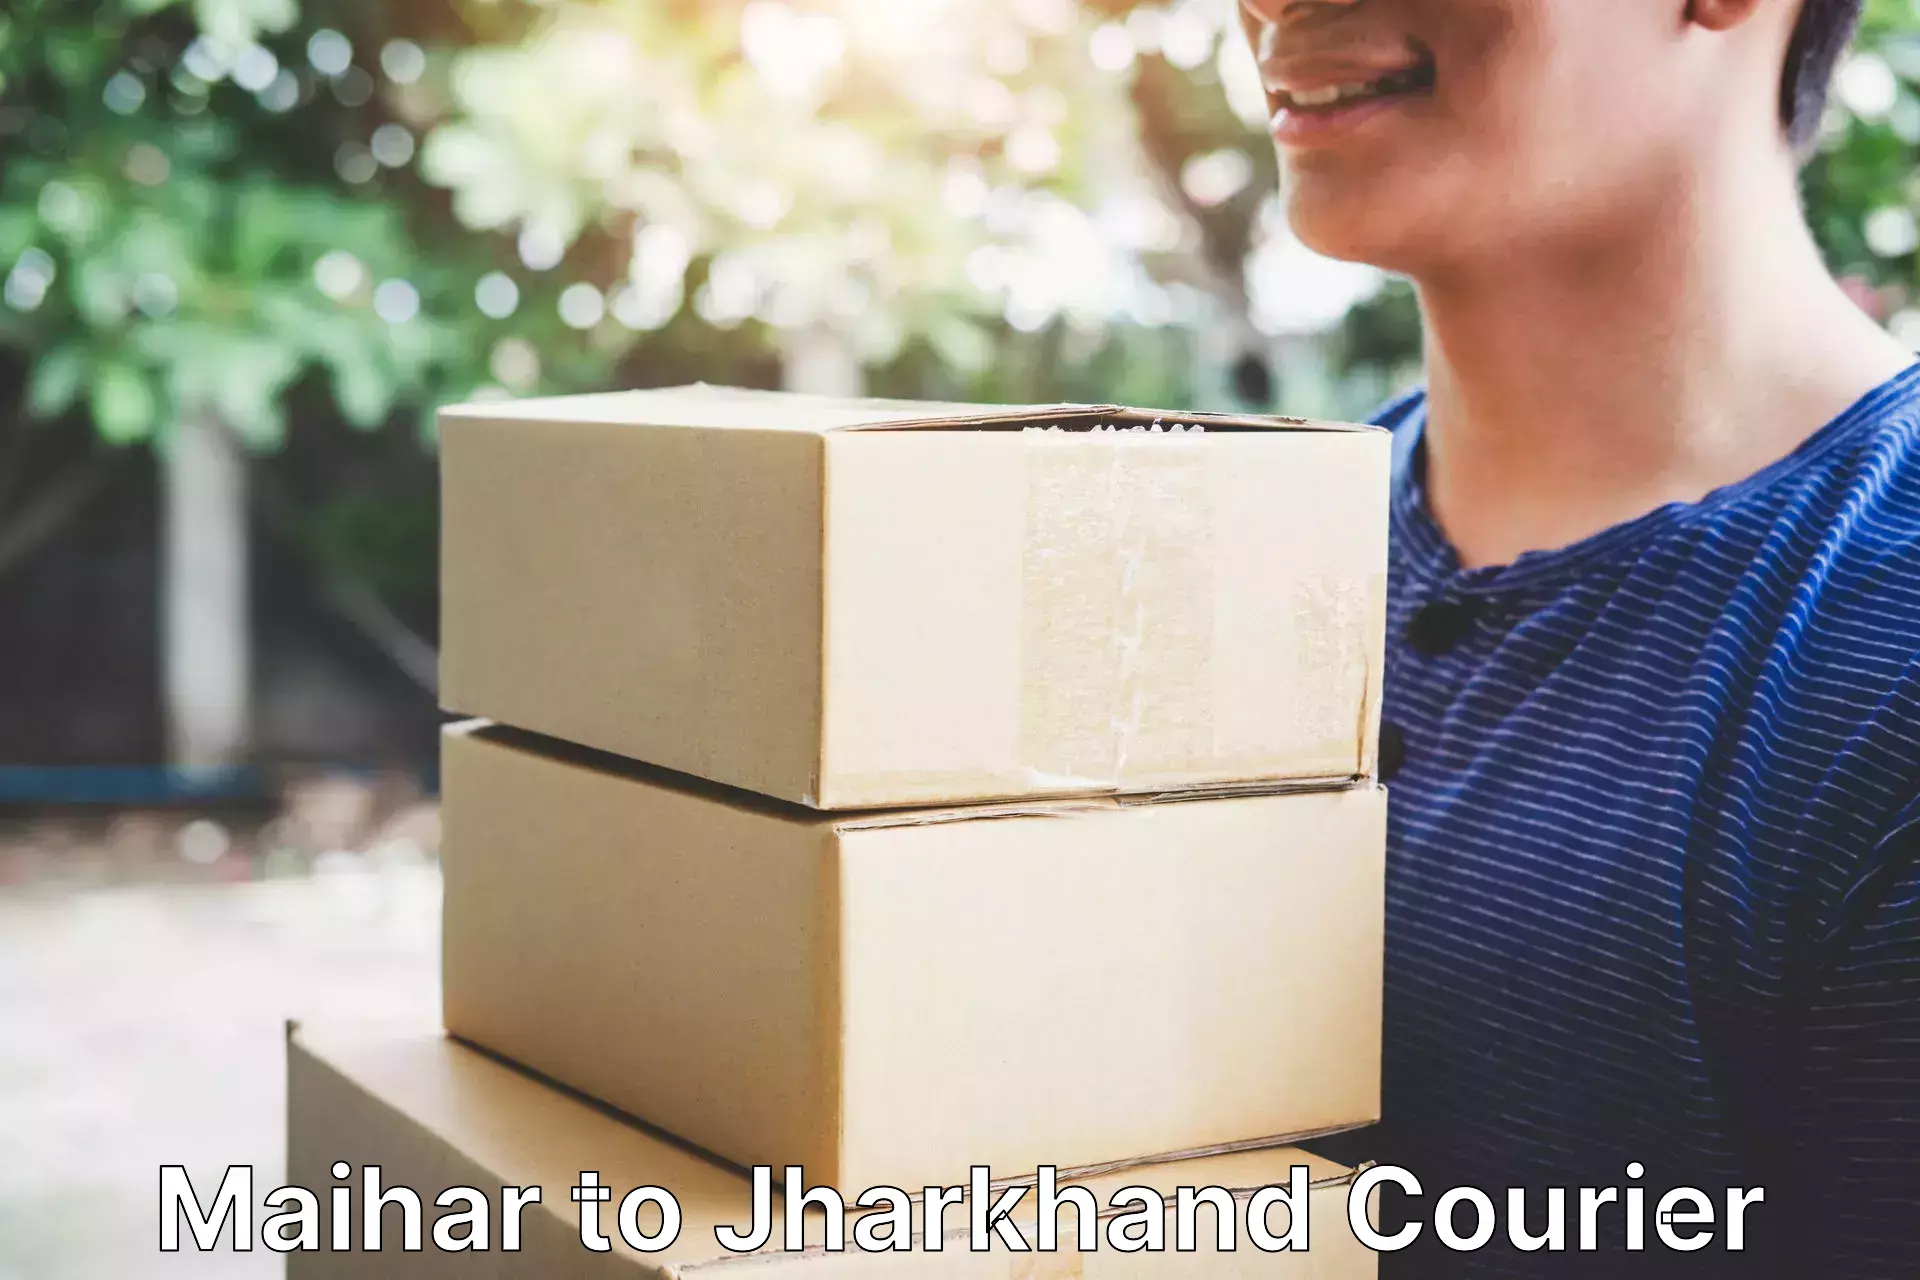 Seamless shipping experience Maihar to Jharkhand